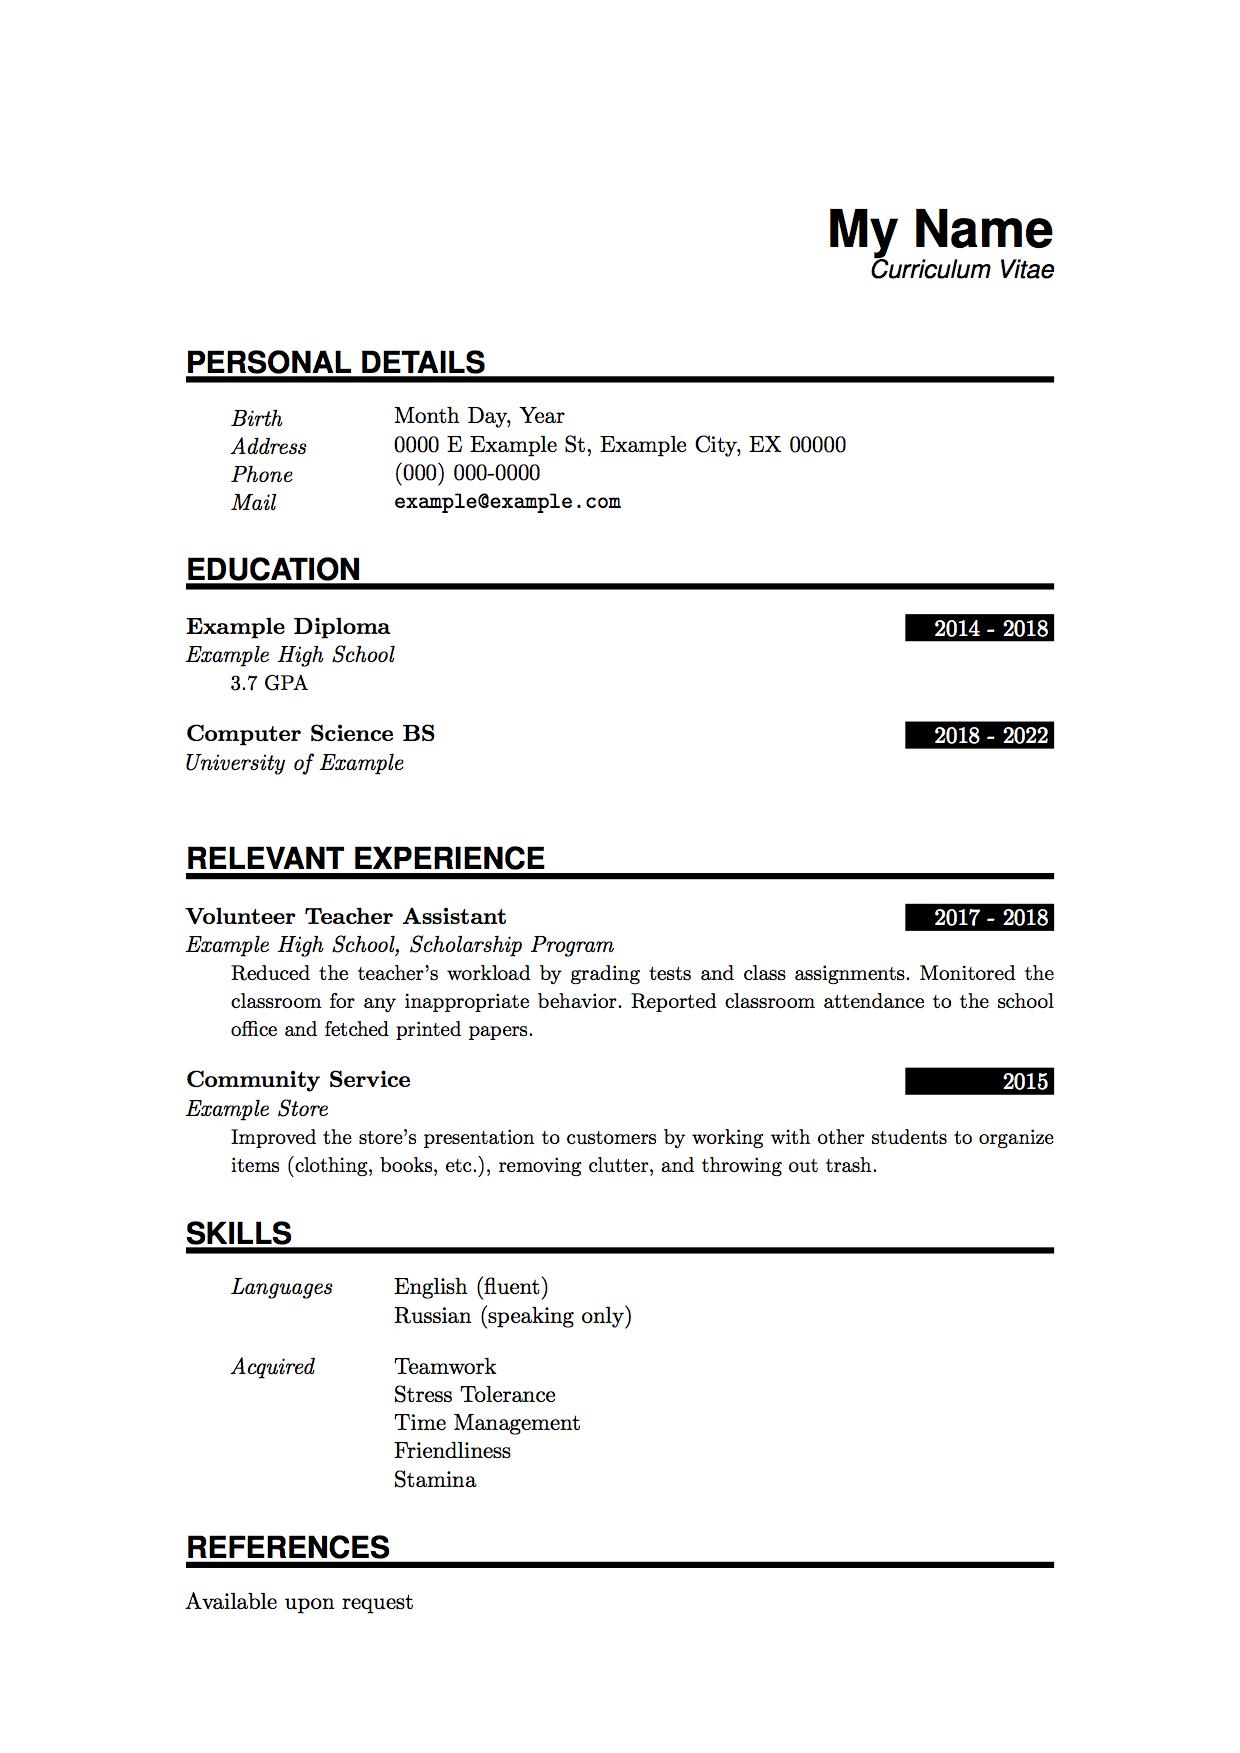 Thoughts on my resume? I